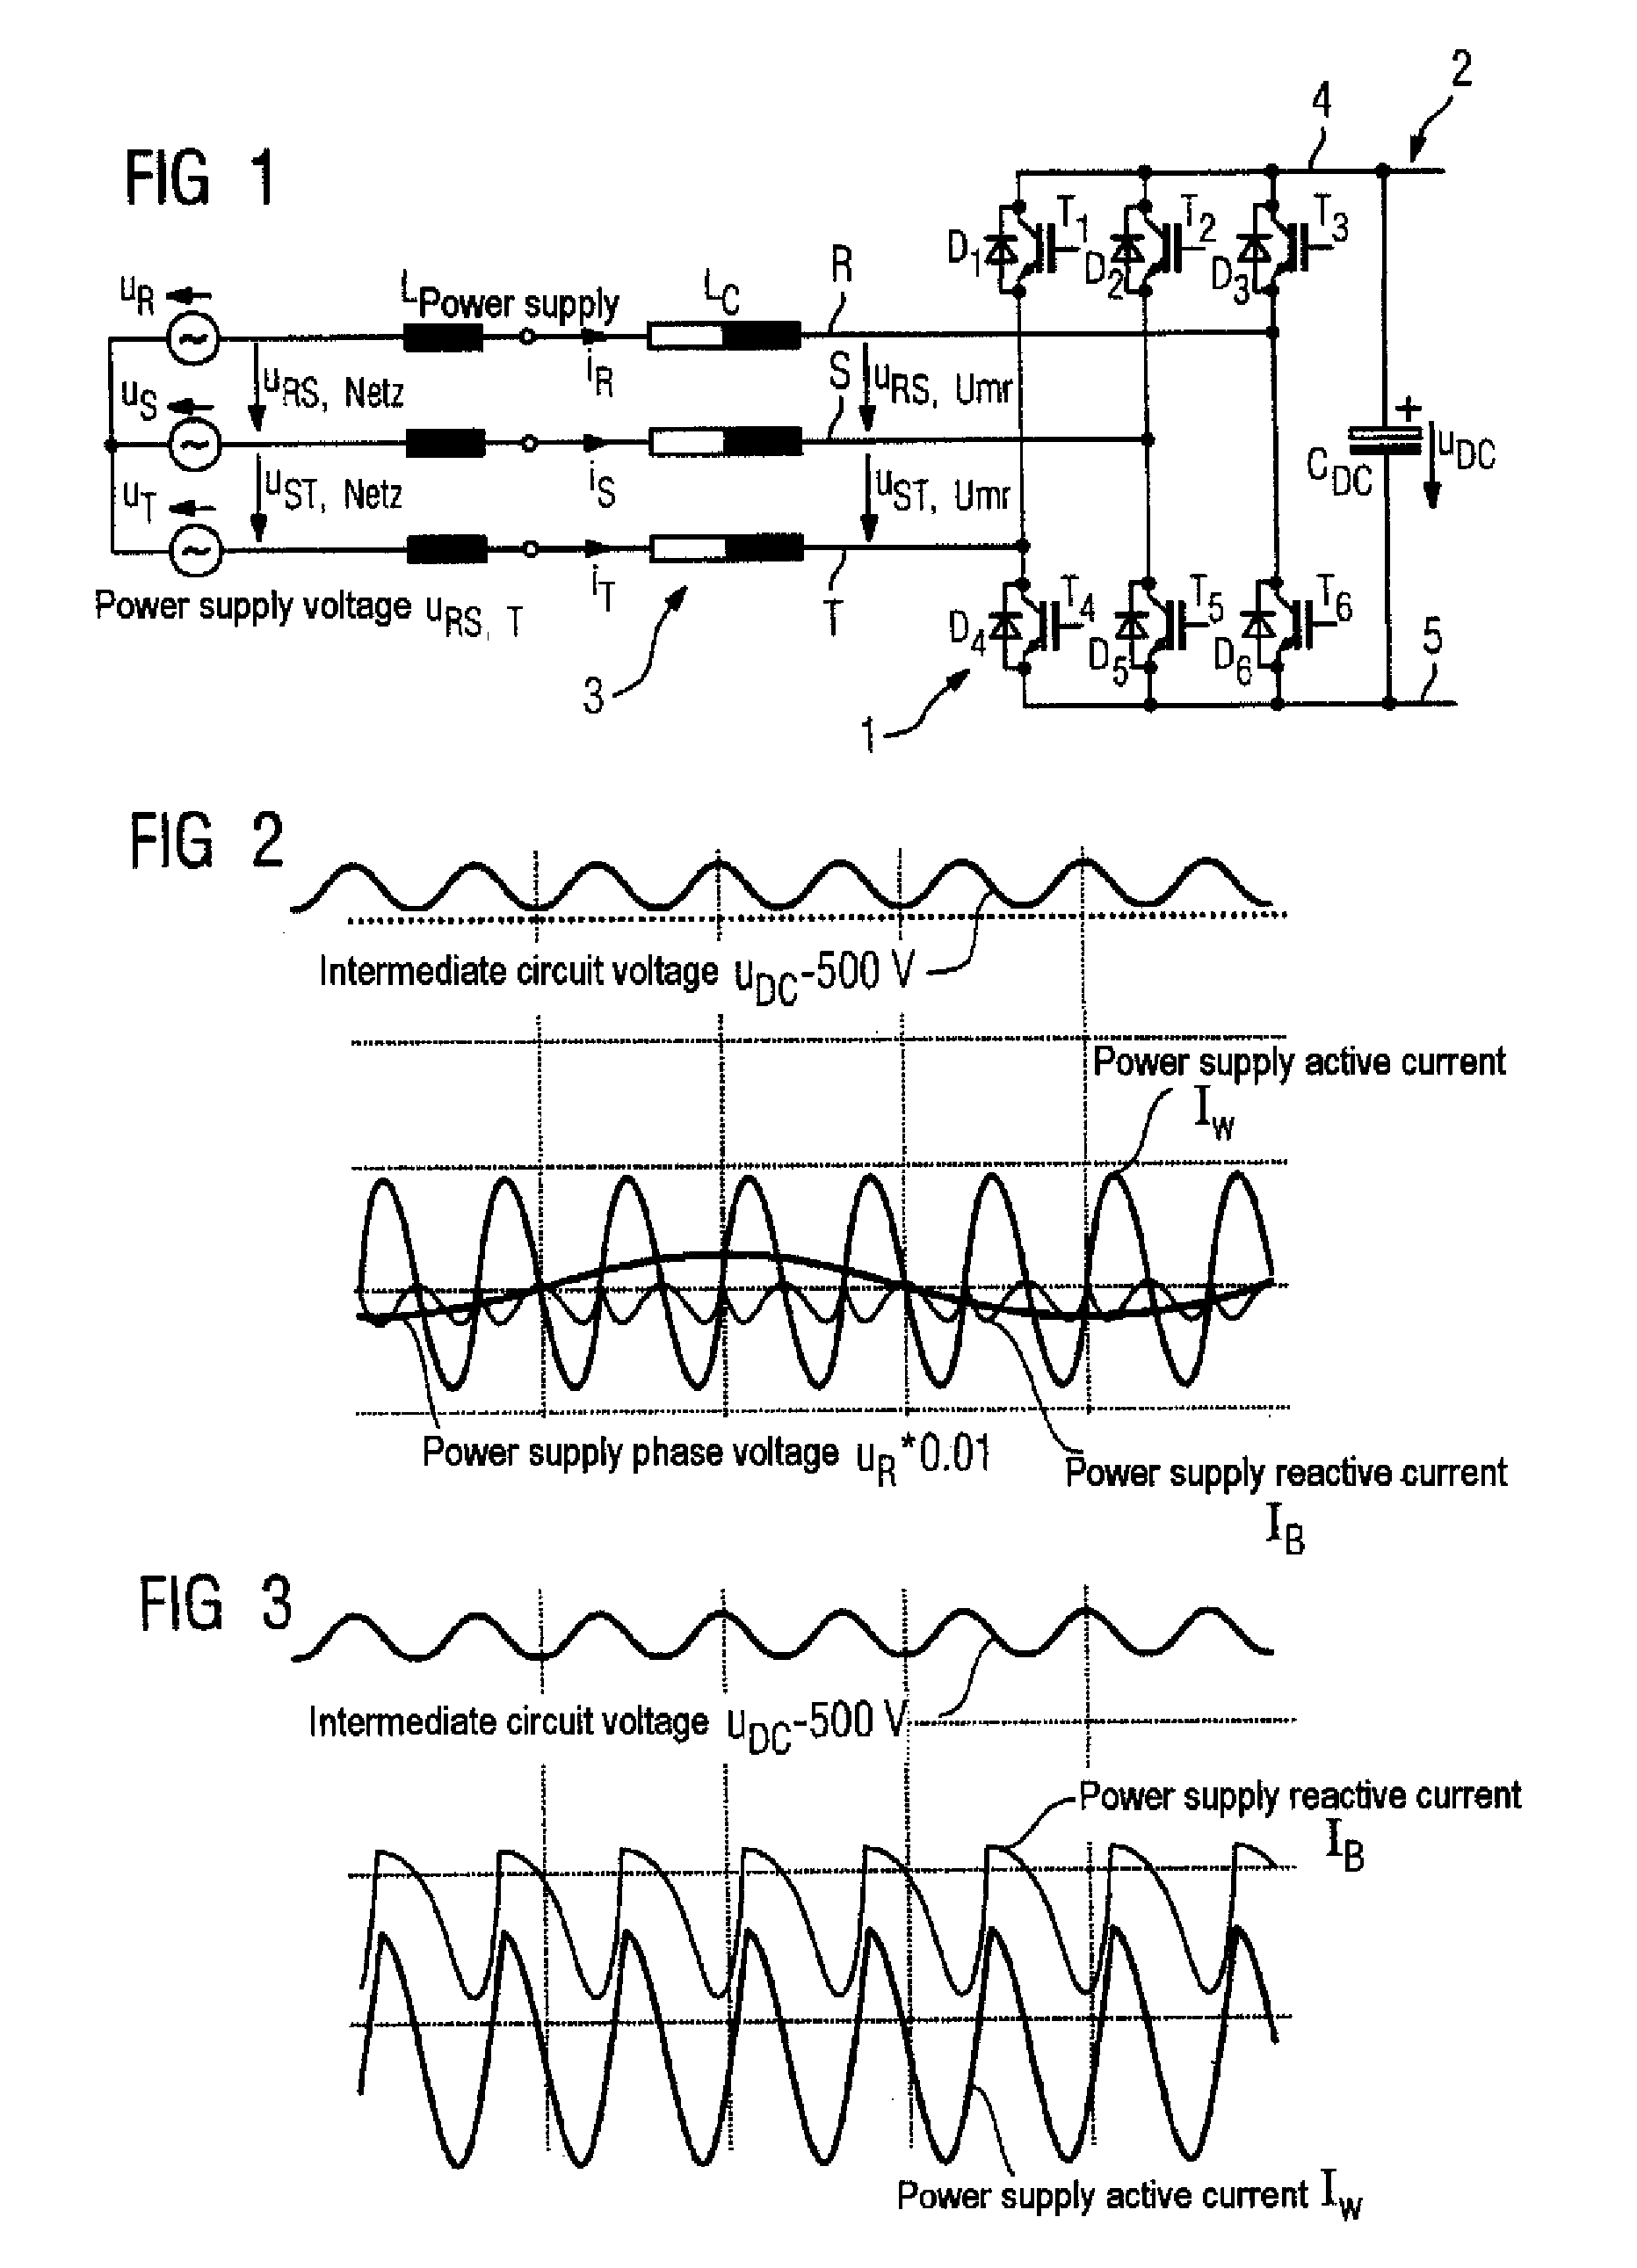 Method for reducing the reactive power requirement of a fundamental frequency clocked power supply side converter under no load and with low motor loading